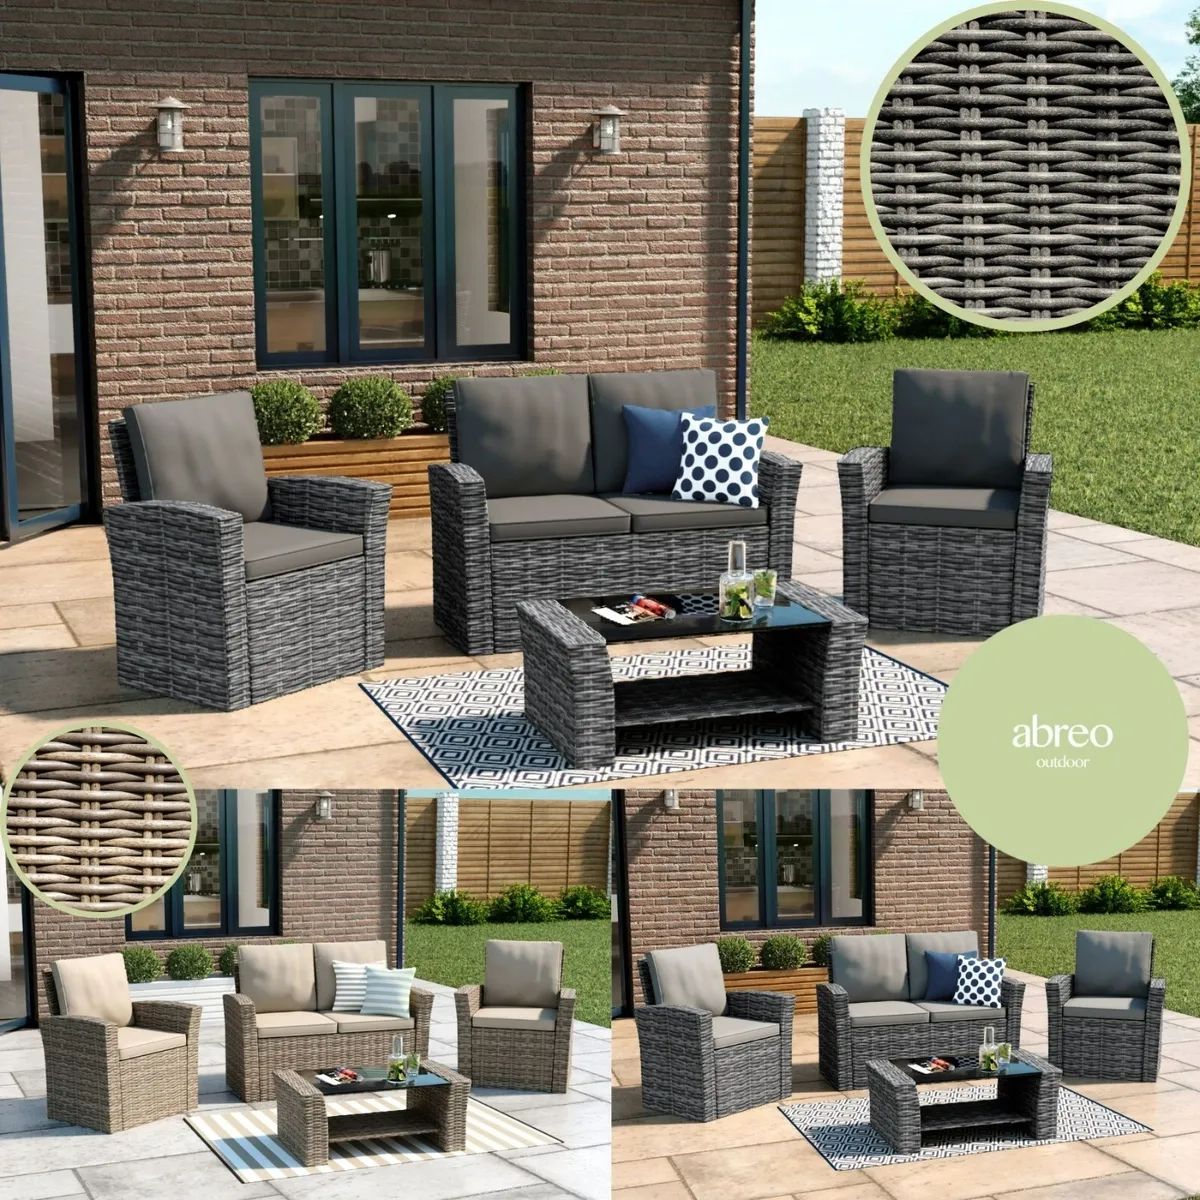 Half Round Rattan Garden Furniture 4 Seater Coffee Table Sofa Chairs Set  Outdoor | Ebay Intended For Outdoor Half Round Coffee Tables (View 7 of 15)